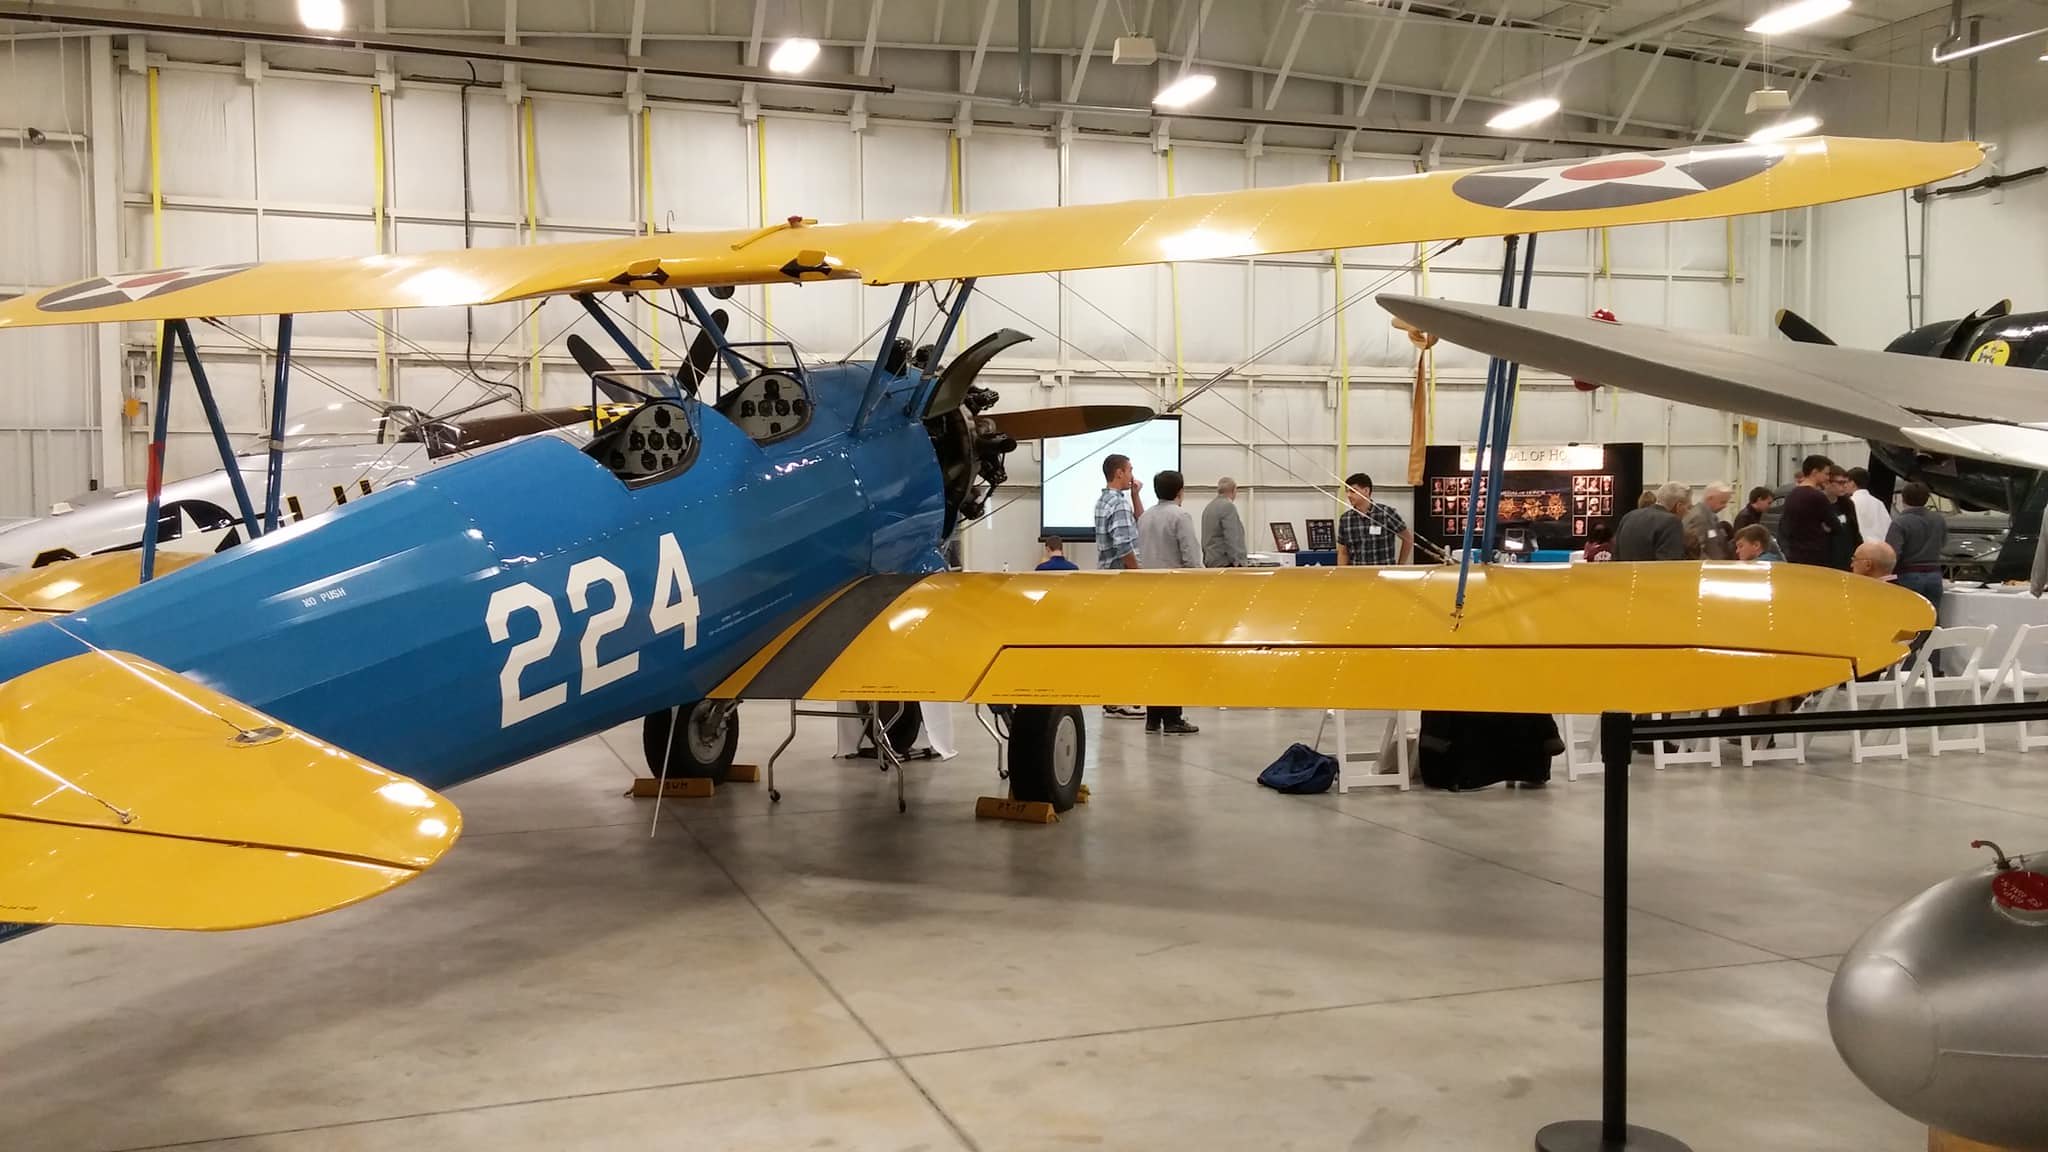 A group of students inside an airplane hanger for an event.